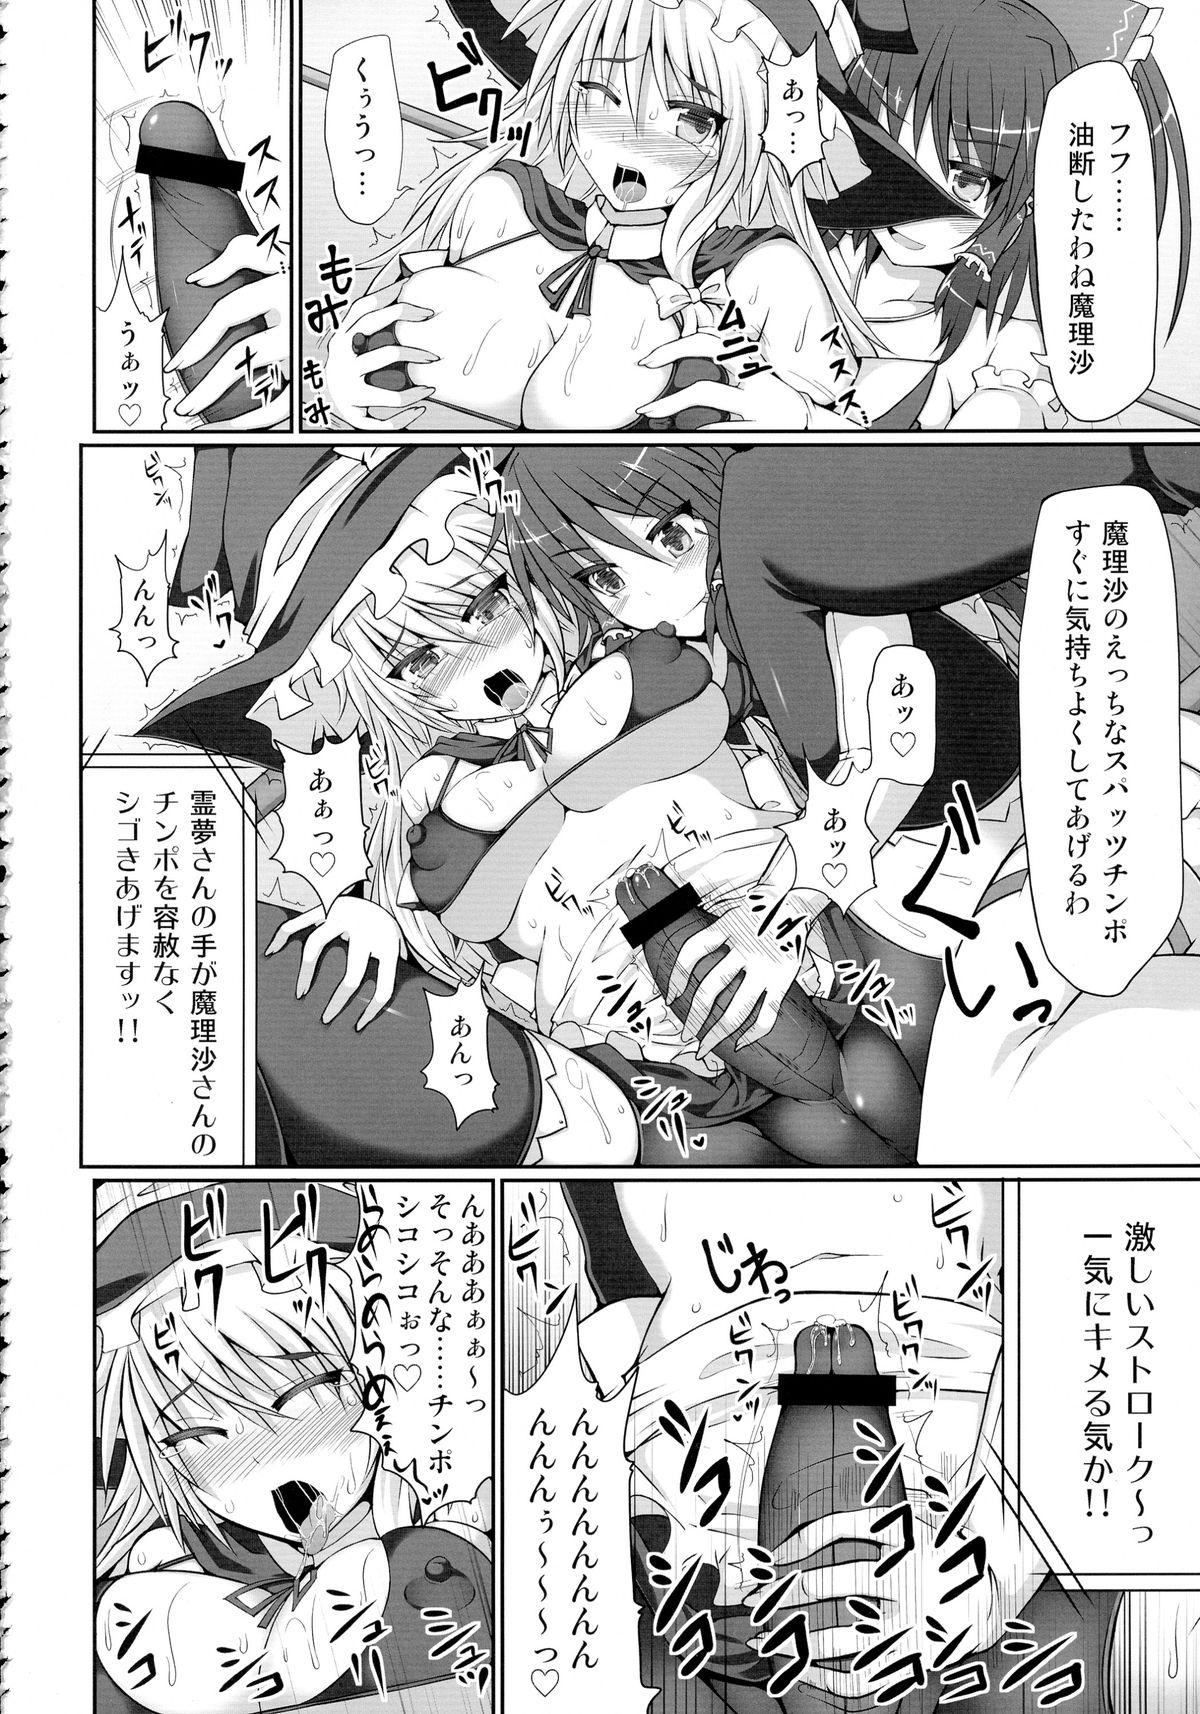 Rimjob Gensoukyou Futanari Chinpo Wrestling 123 GFCW BEST BOUT - Touhou project Nasty Free Porn - Page 12